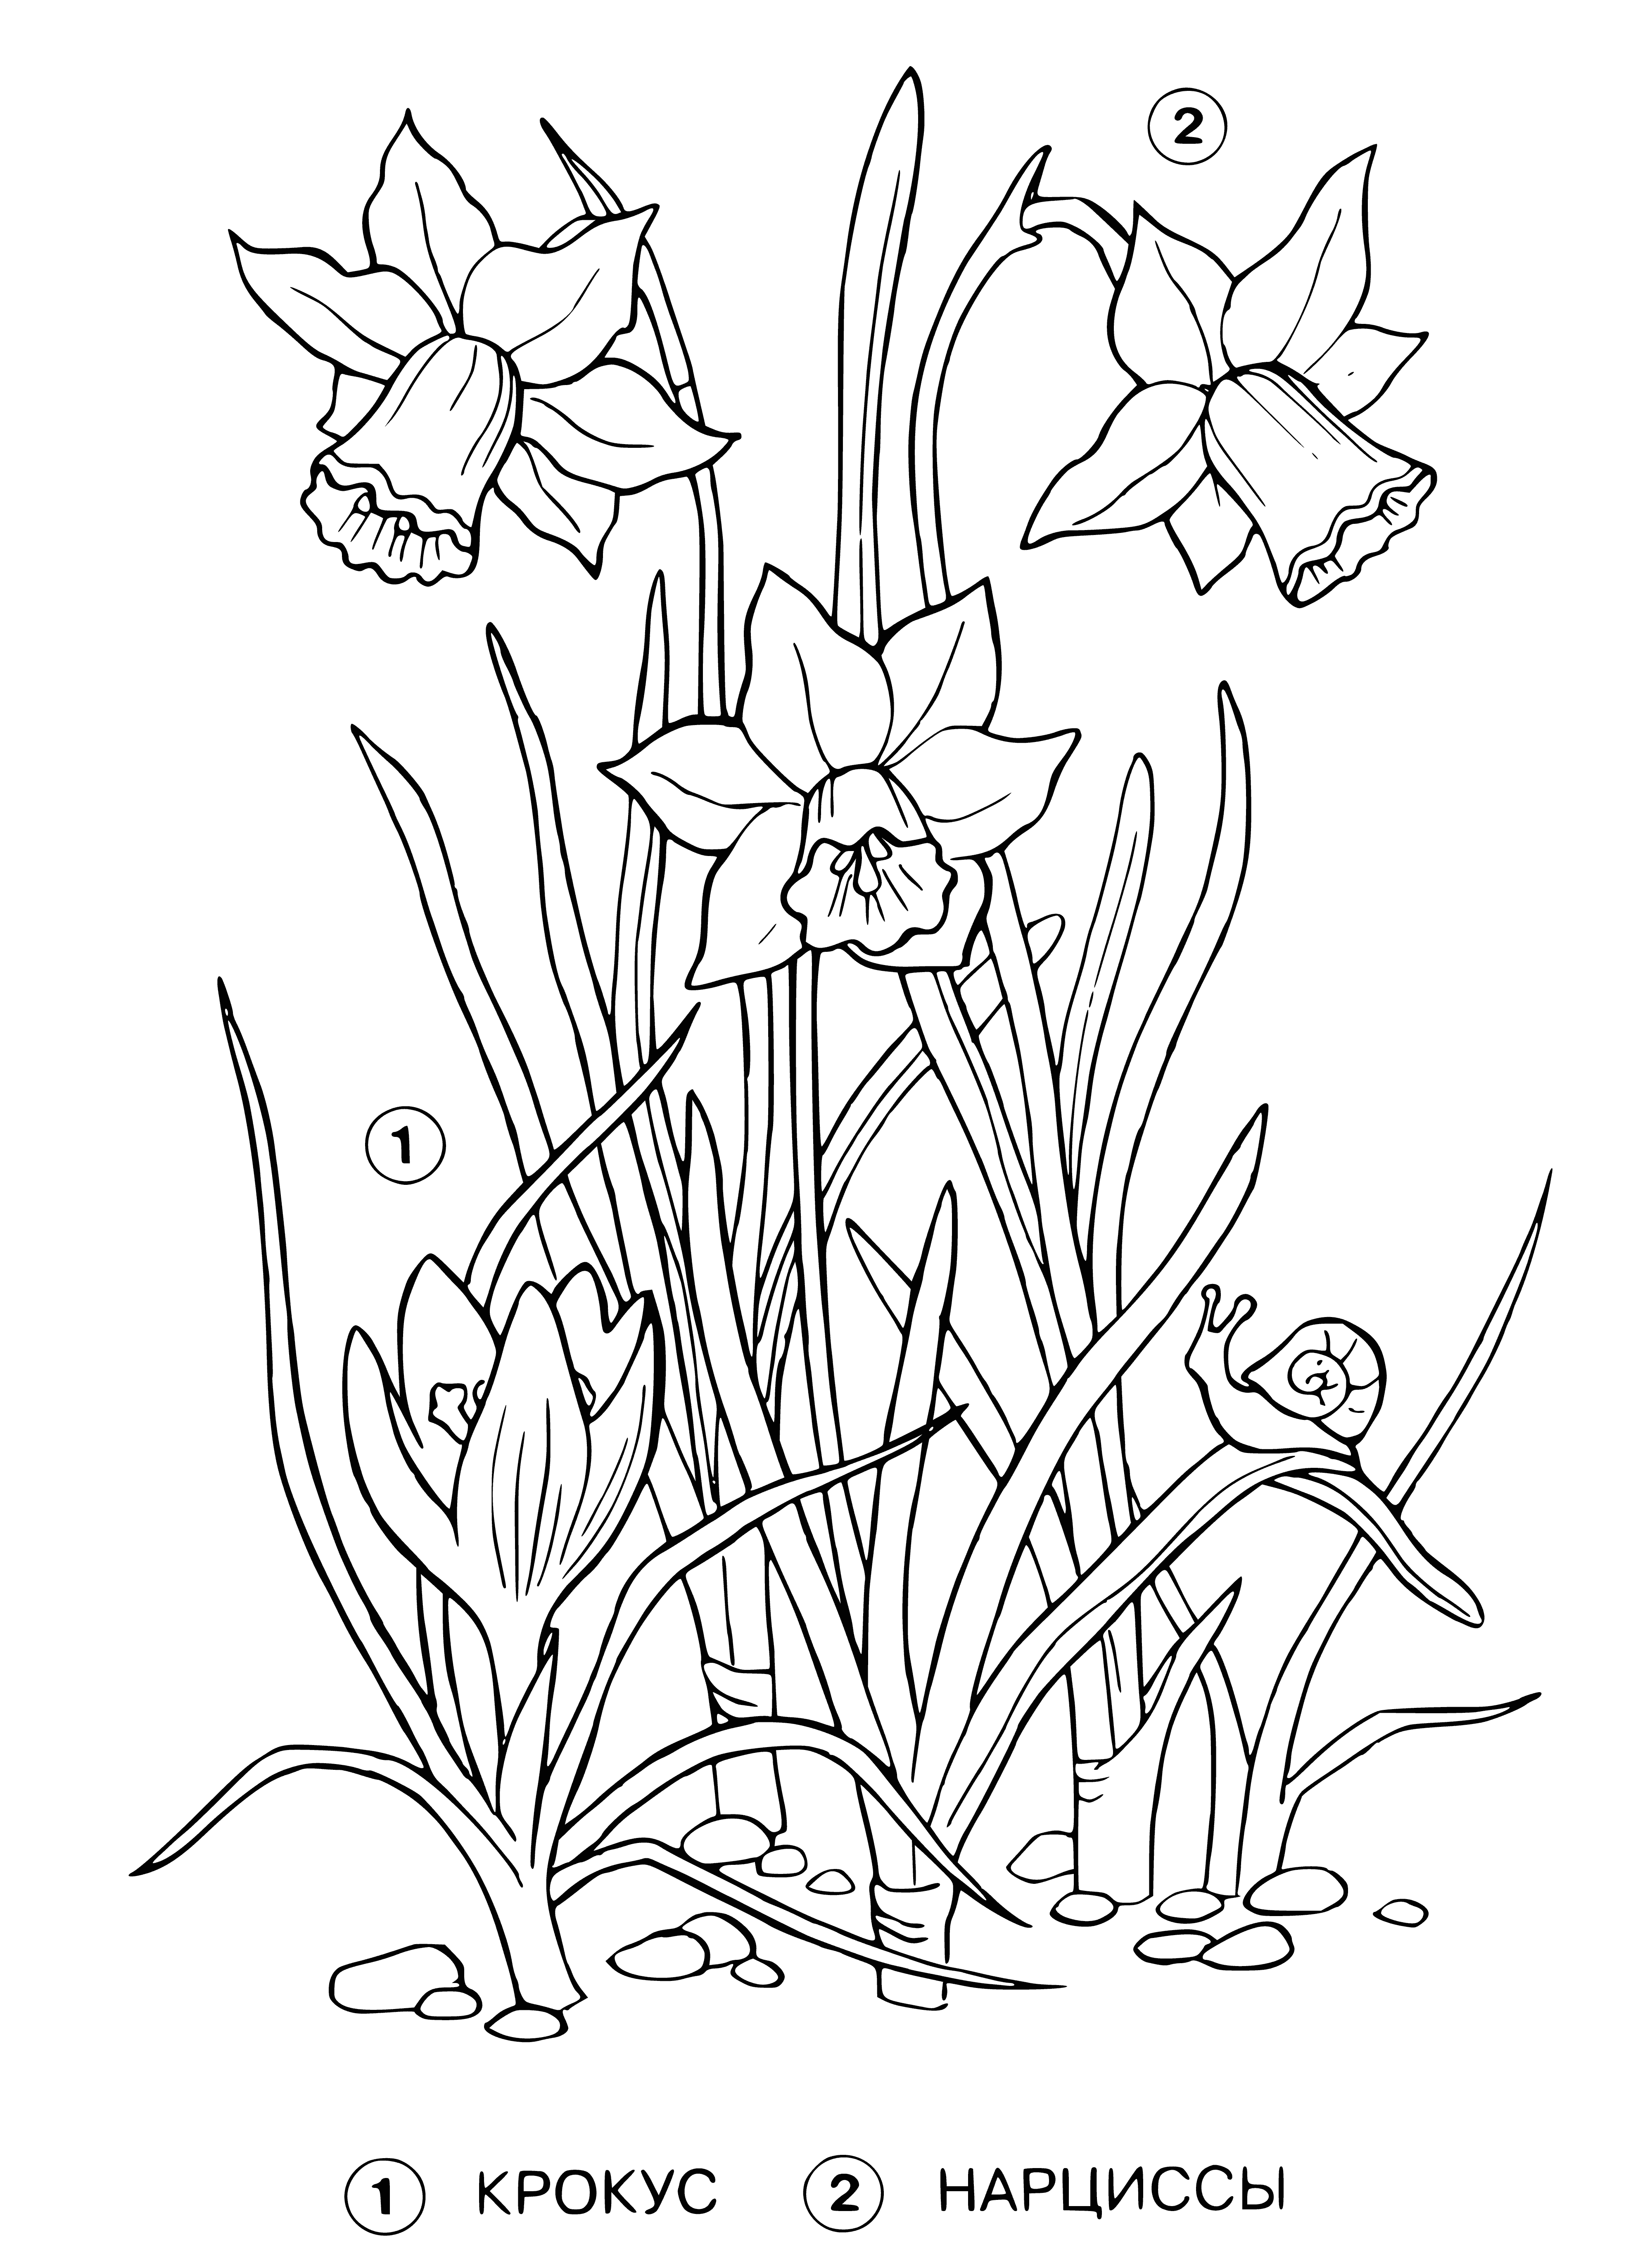 coloring page: Two flowers blooming in a garden: a purple Crocus with yellow stamens & a yellow daffodil with a long stem, surrounded by green leaves.